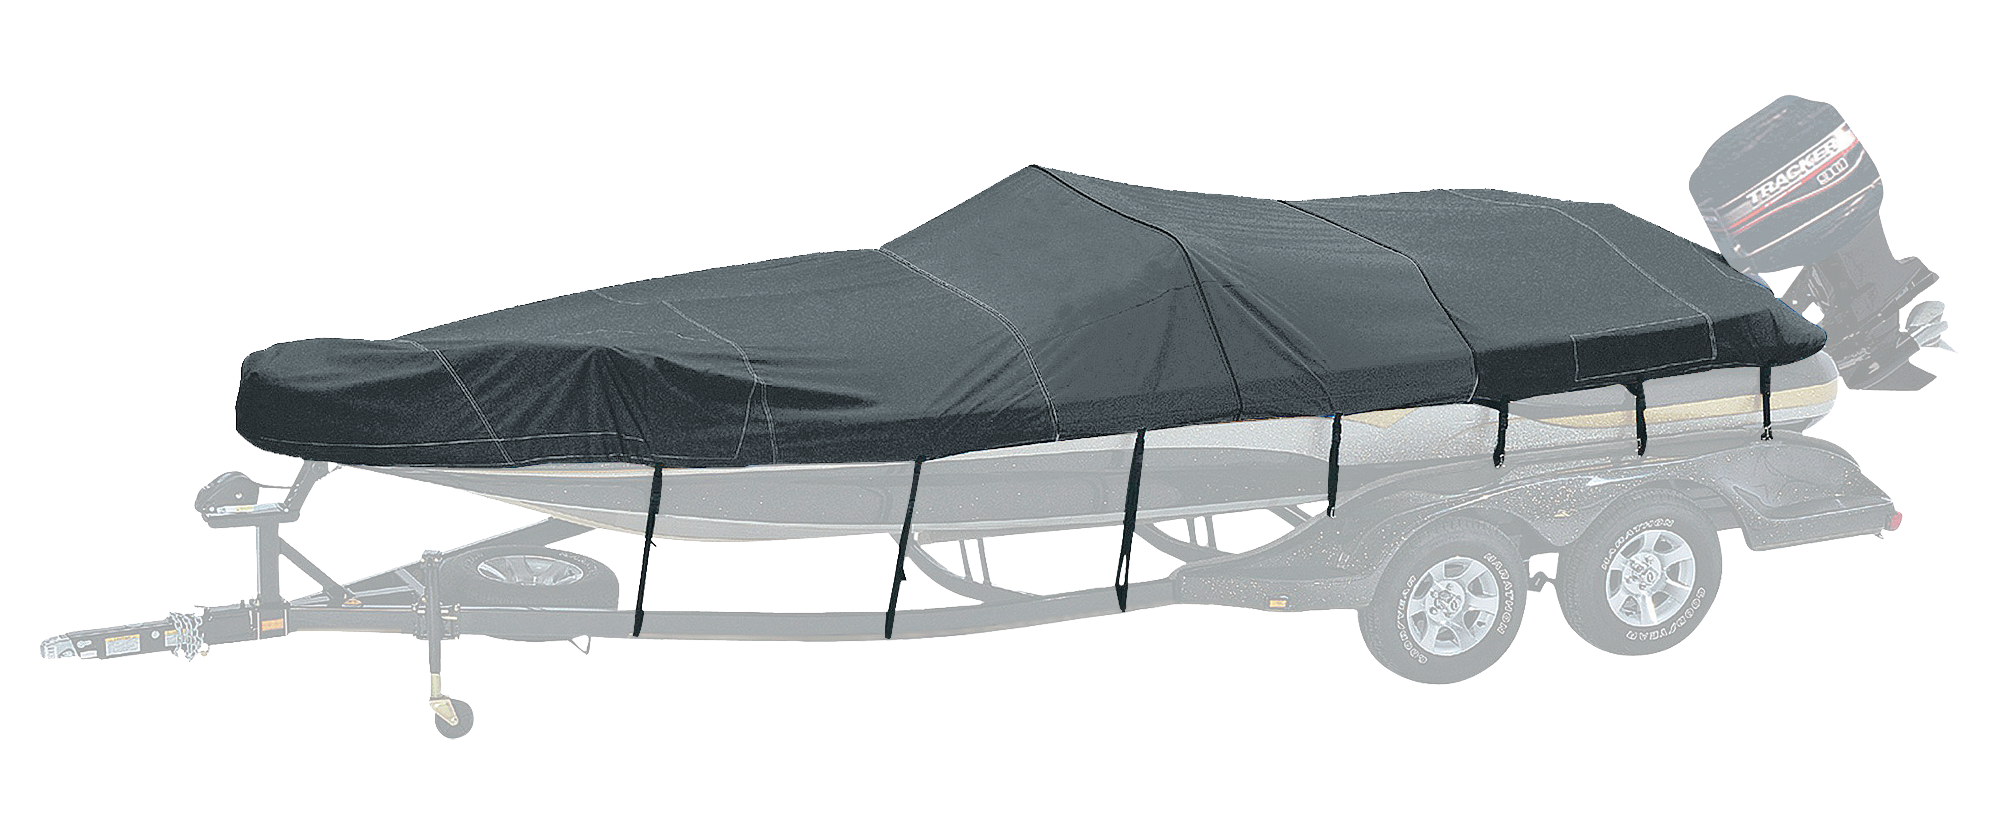 Bass Pro Shops Exact Fit Boat Cover by Westland - Tahoe Boats - 2002-2004 204 Deckboat I/O - Charcoal